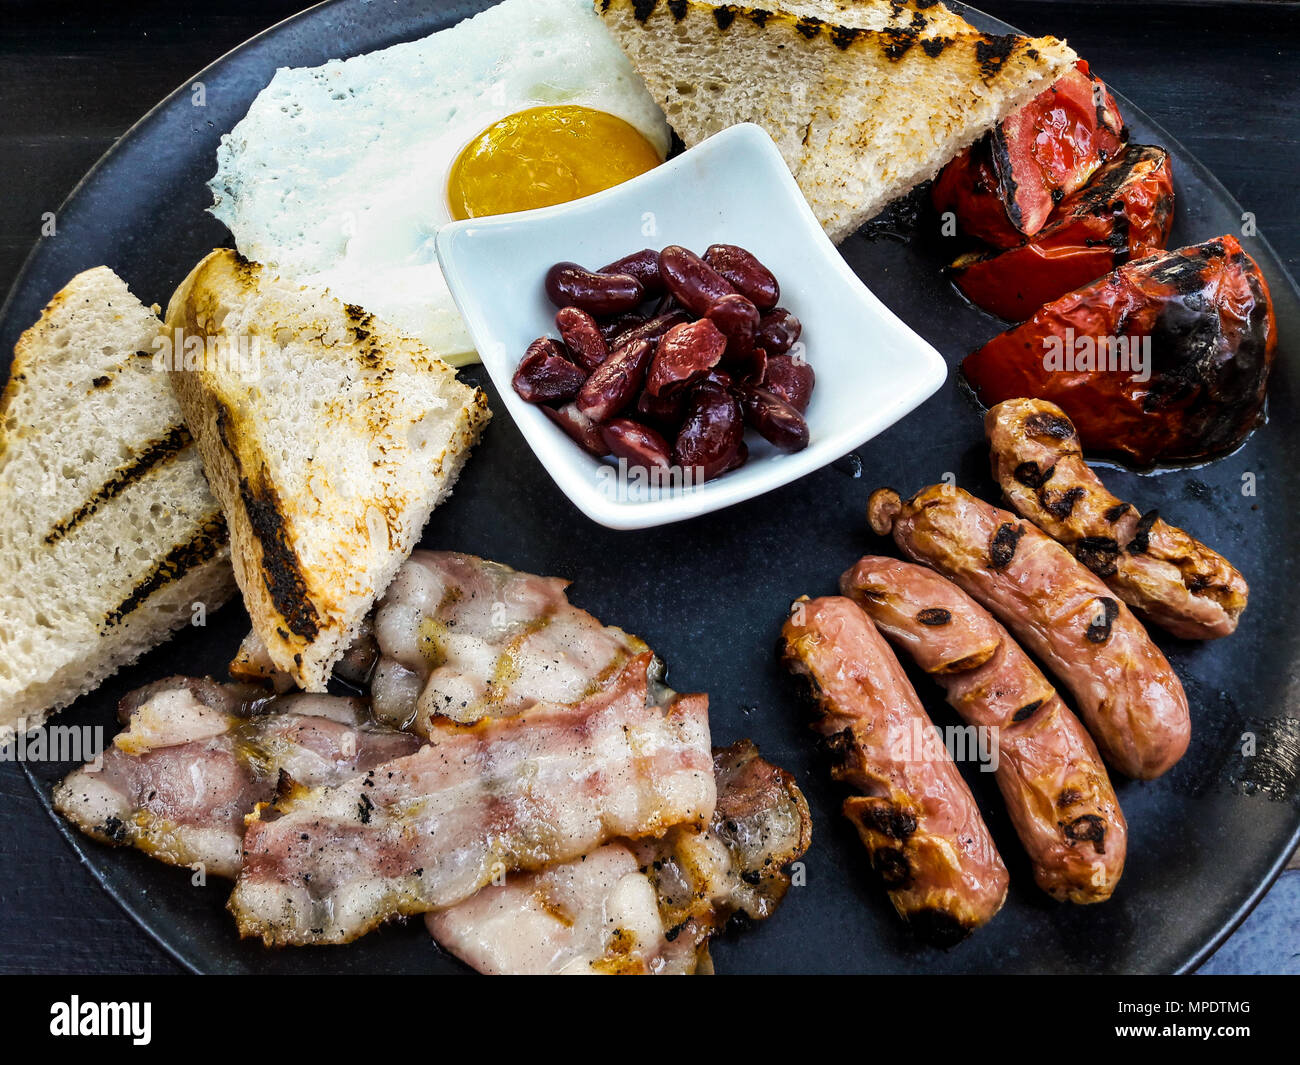 English Breakfast with Bacon, Red Beans, Sausage, Egg and Fried Bread on black surface. Stock Photo